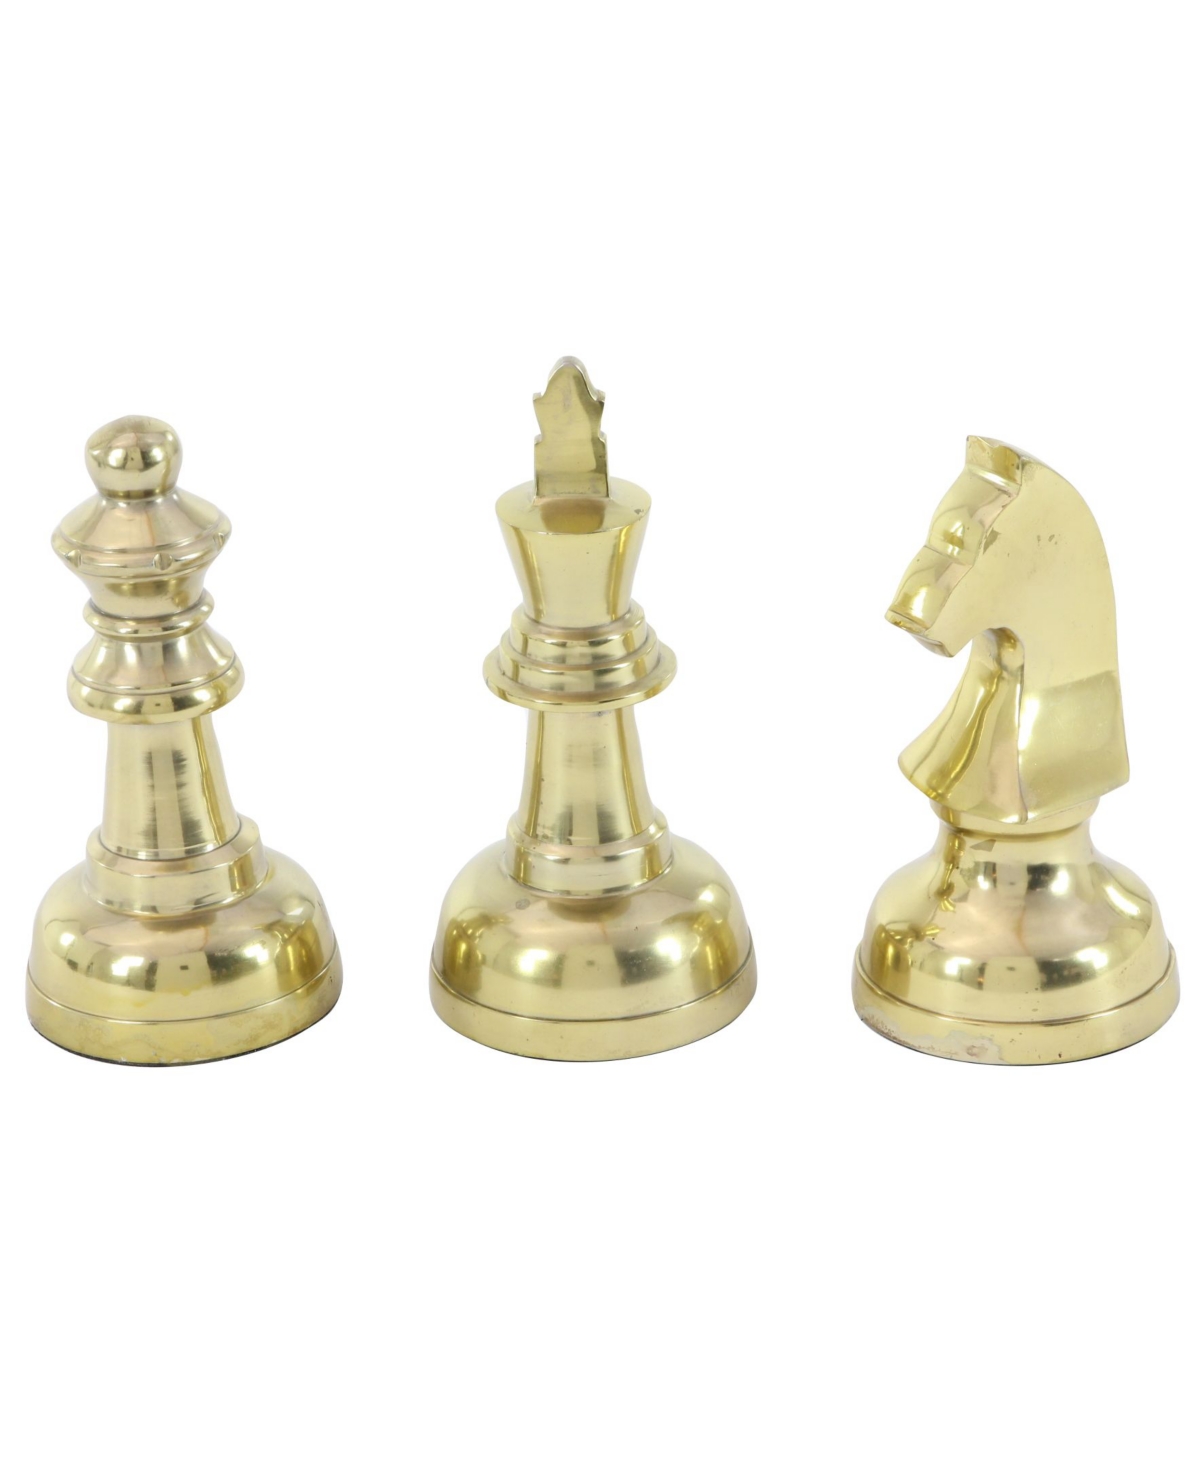 Rosemary Lane Large Metallic Decorative Chess Piece Sculptures Table Decor, Set Of 3 In Gold-tone